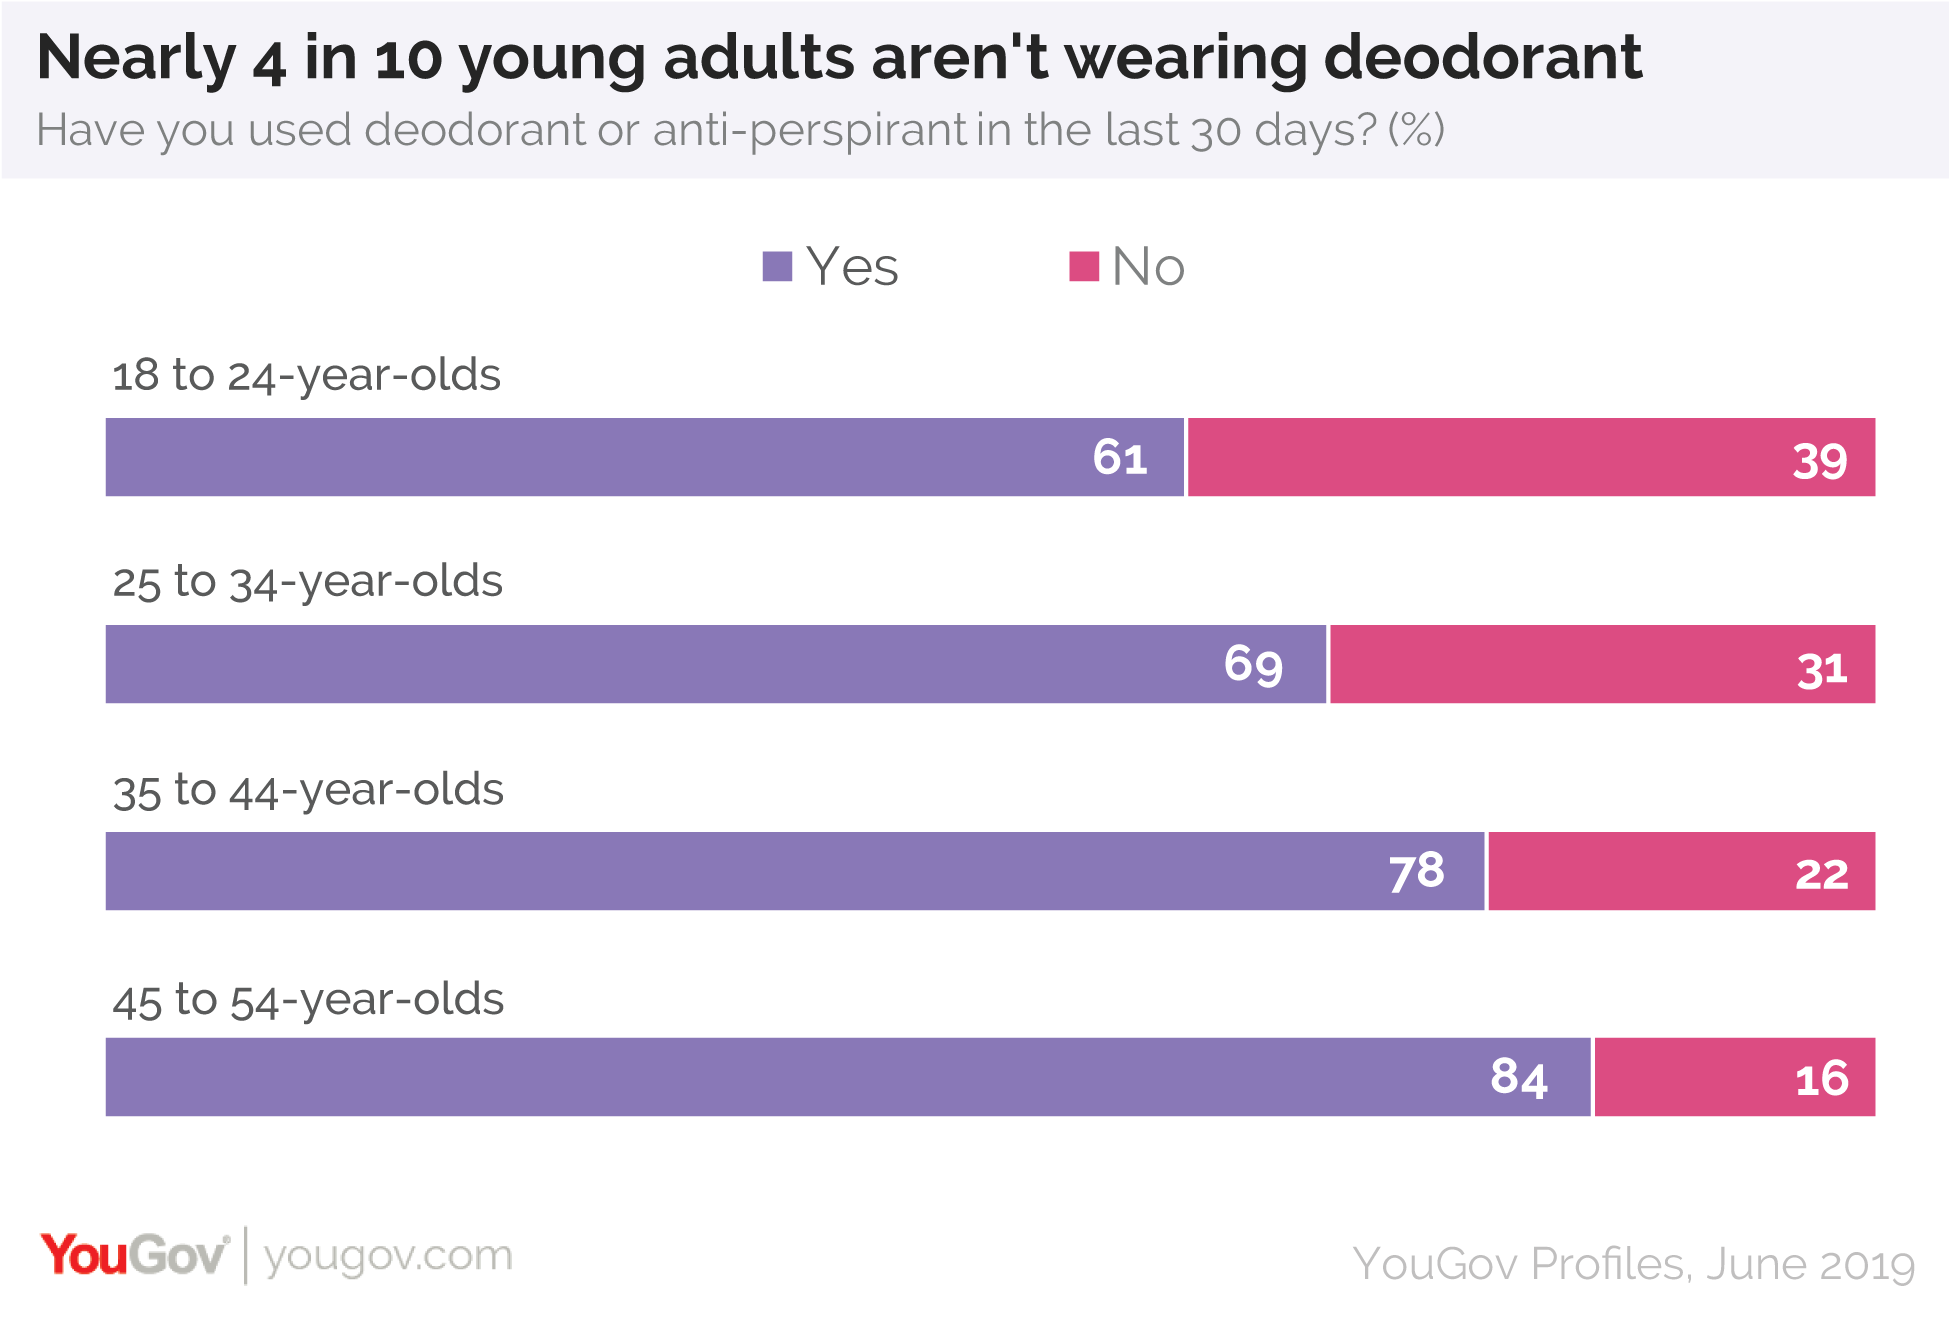 Nearly 4 in 10 young adults are not wearing deodorant